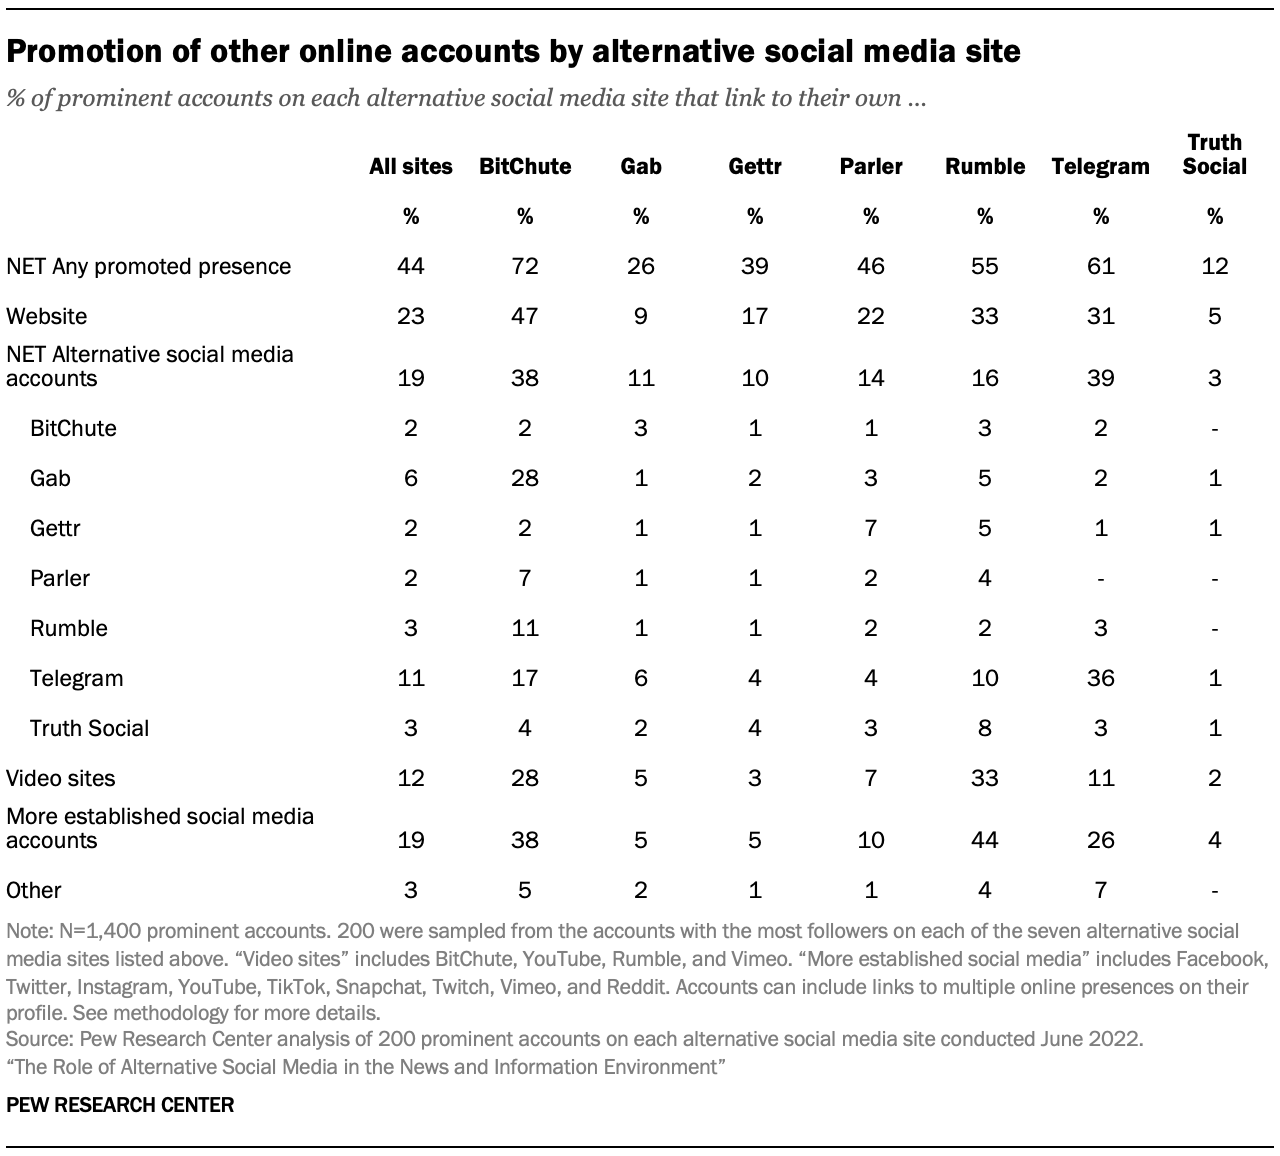 A table showing Promotion of other online accounts by alternative social media site